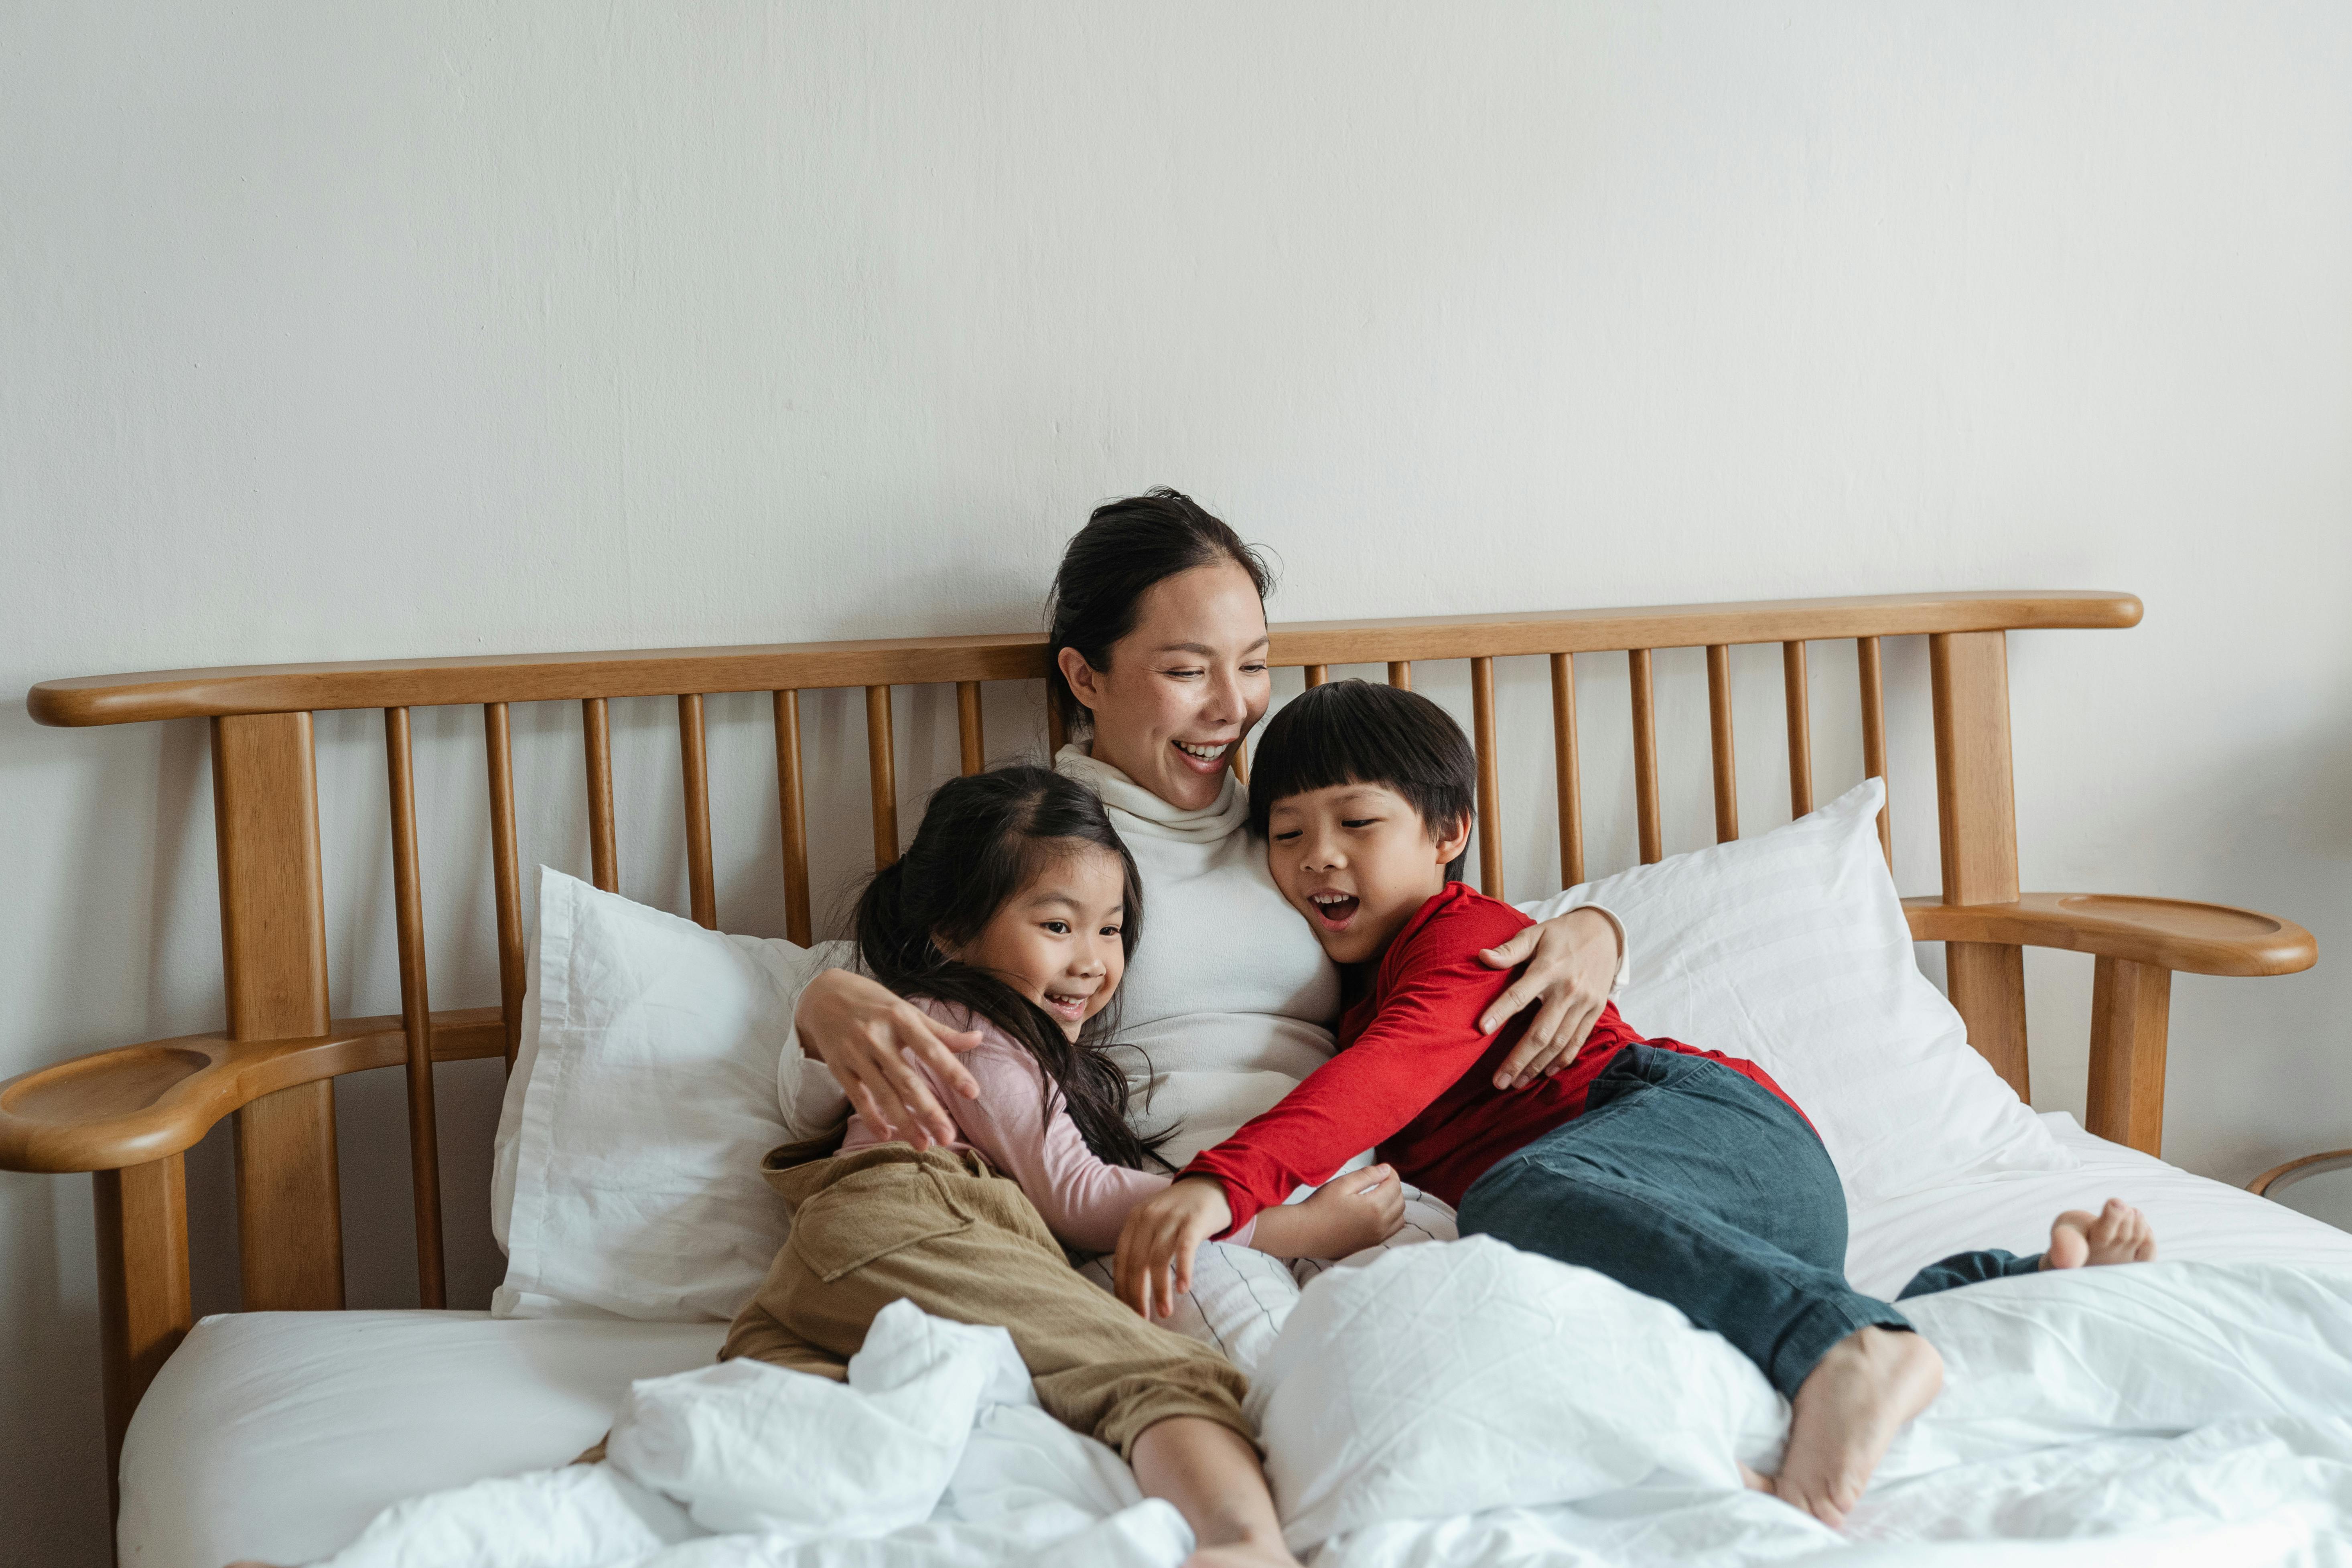 As Asian mother smiles as she hugs a son on one side of her and a daughter on the other. The mother and two young children are sitting on a bed with white bedding.